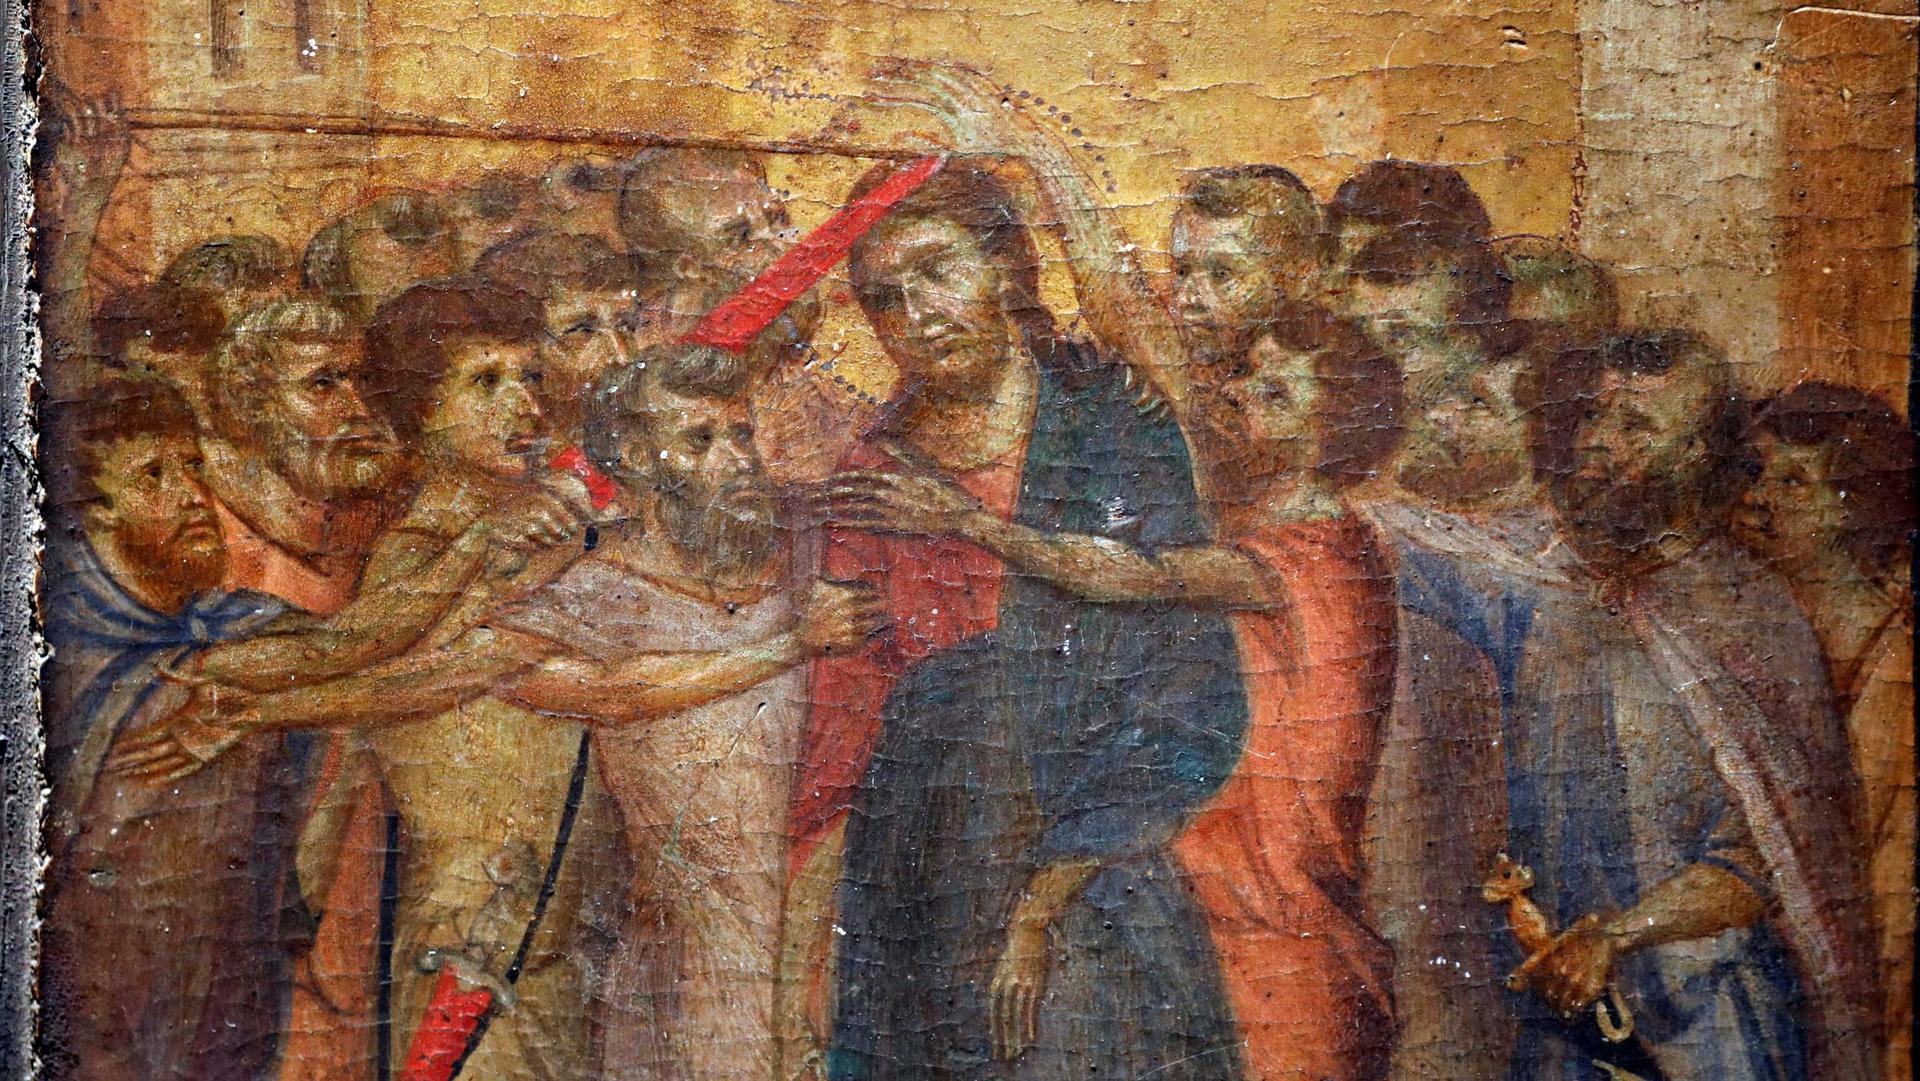 A renaissance-era painting shows Jesus surrounded by other people, some of whom are holding swords